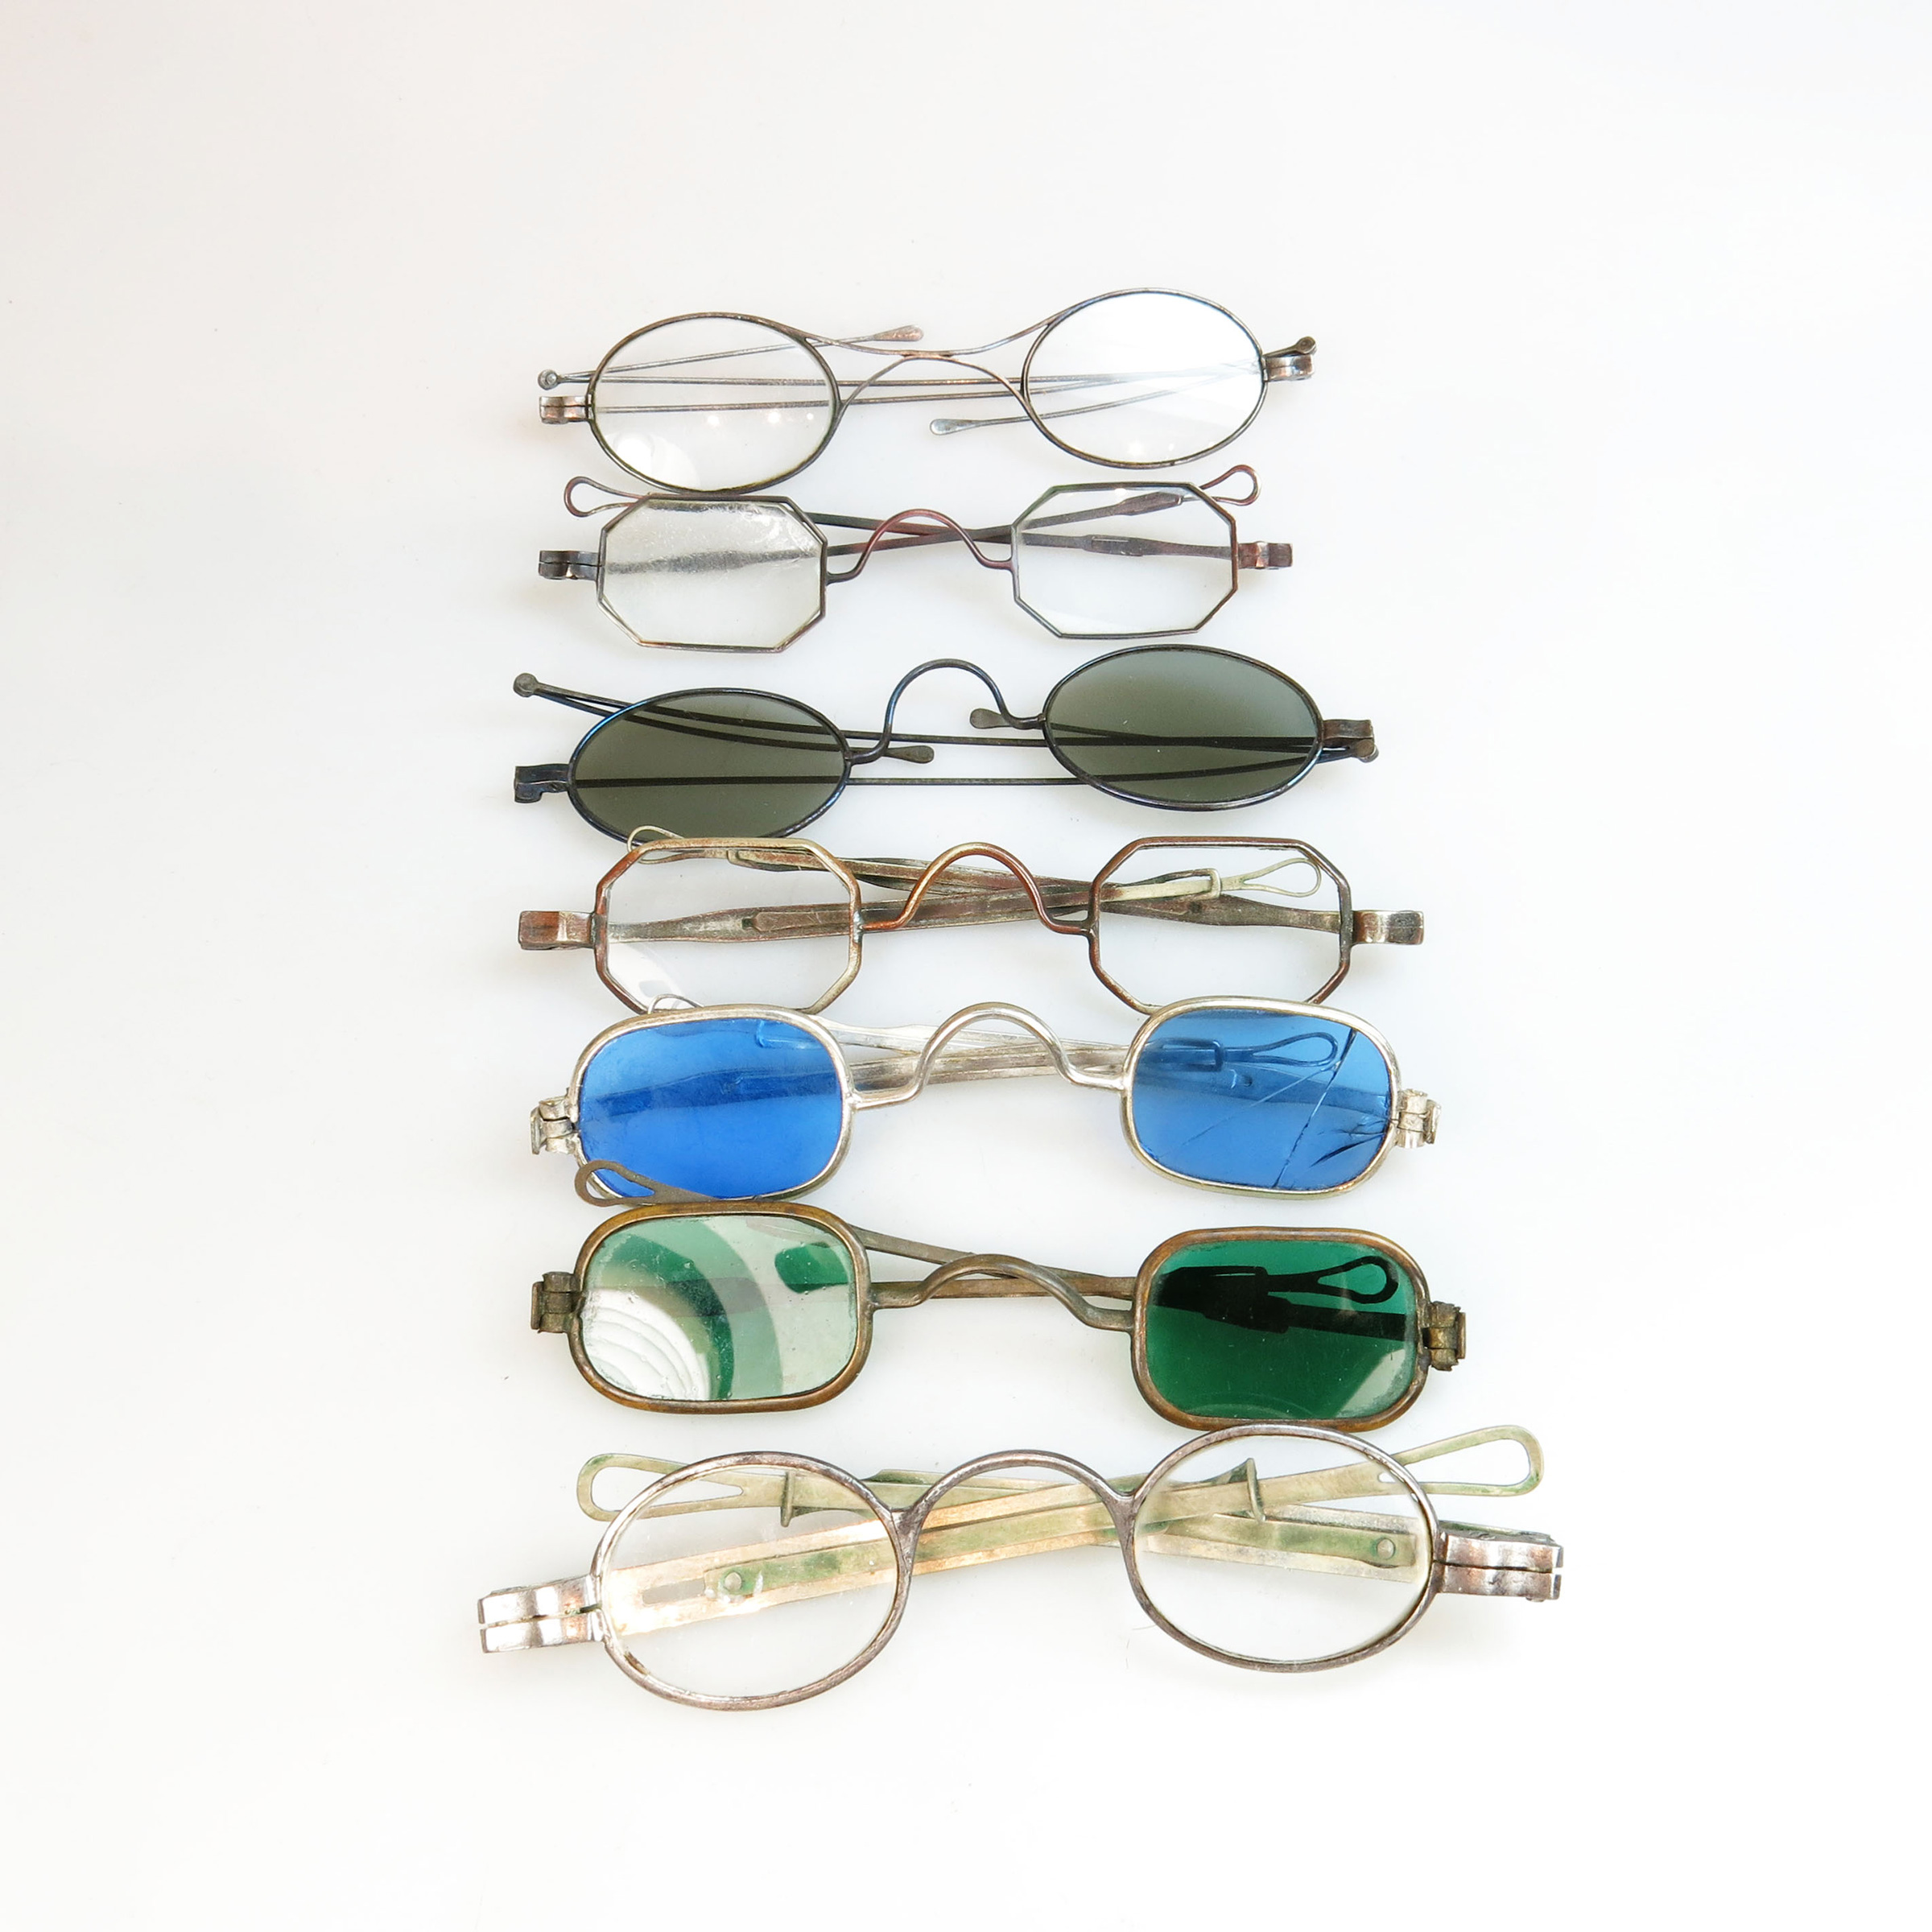 7 Pairs Of 19th Century Spectacles